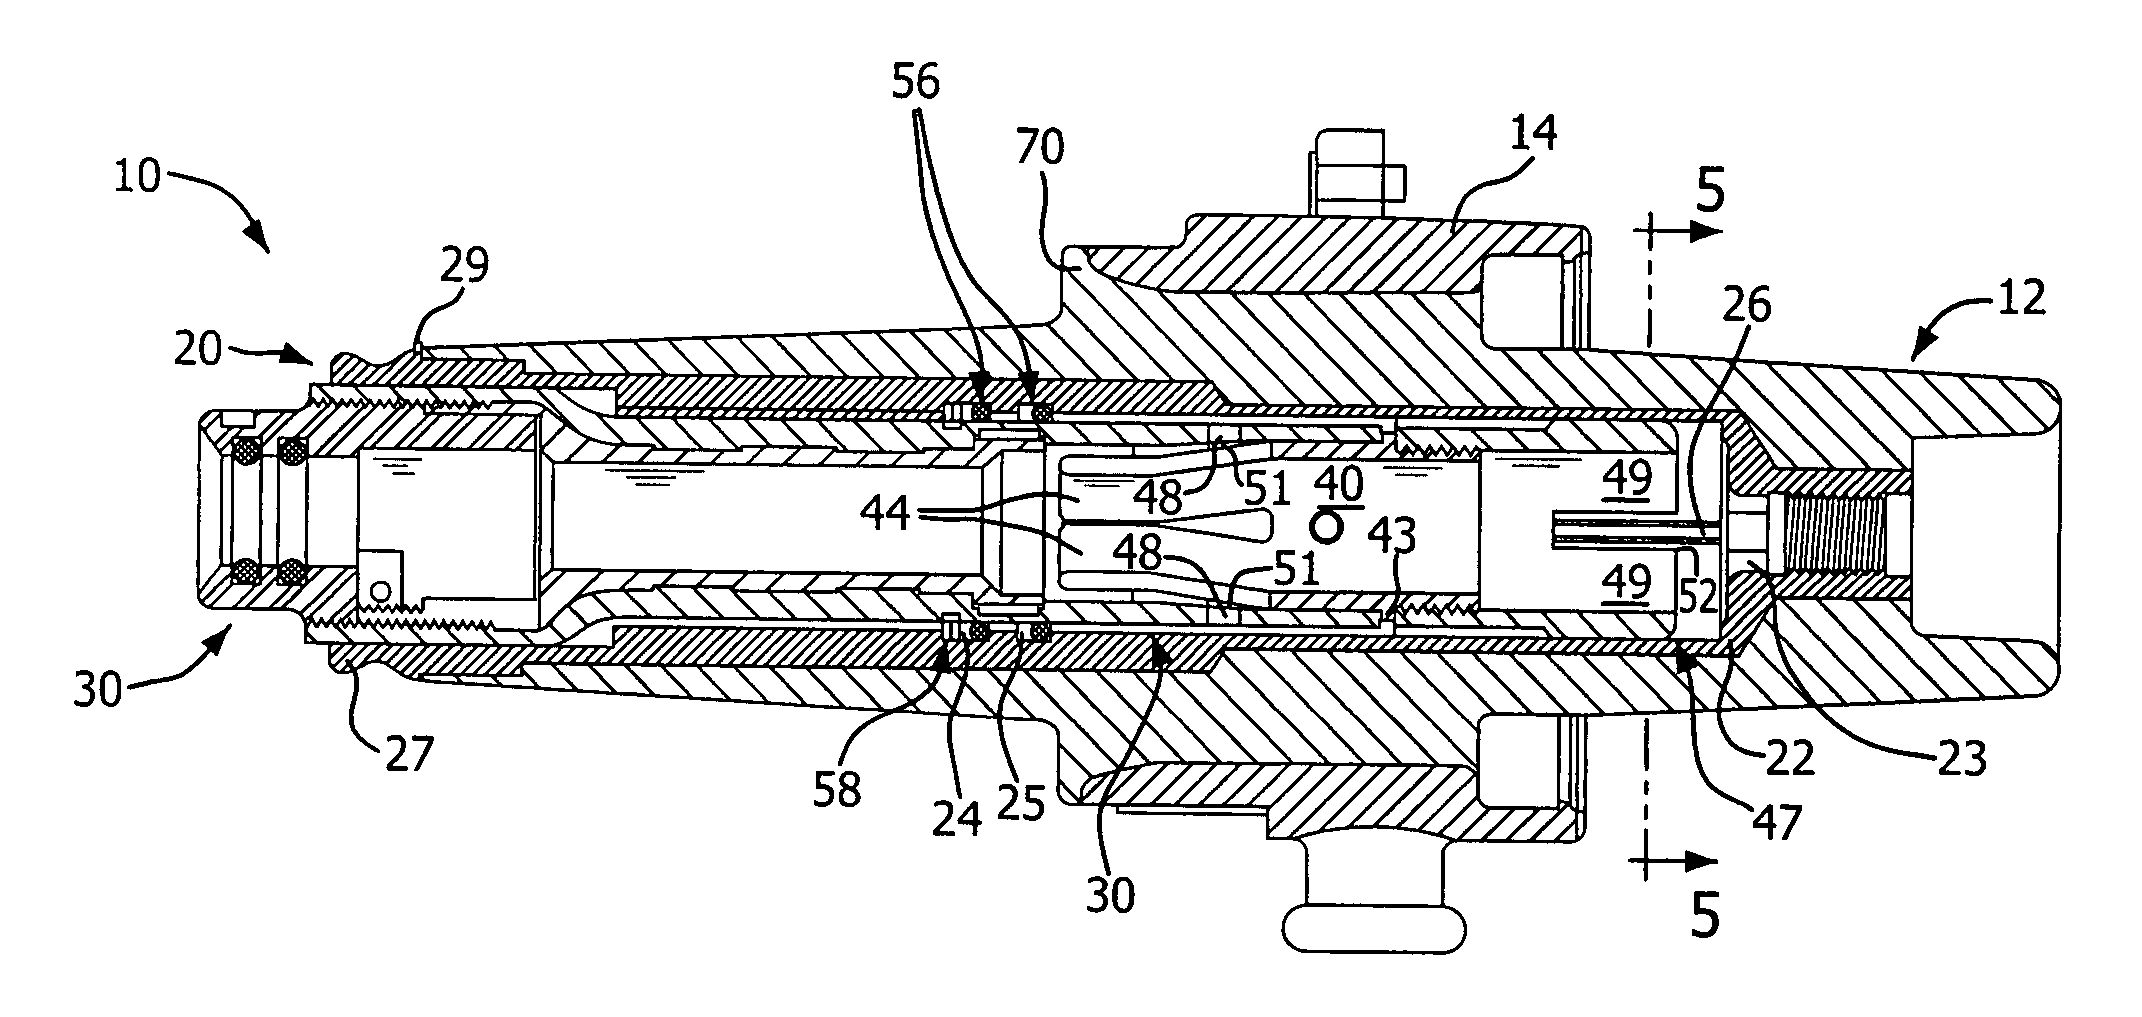 Electrical connector with arc shield, piston-contact positioner and electric stress graded interface